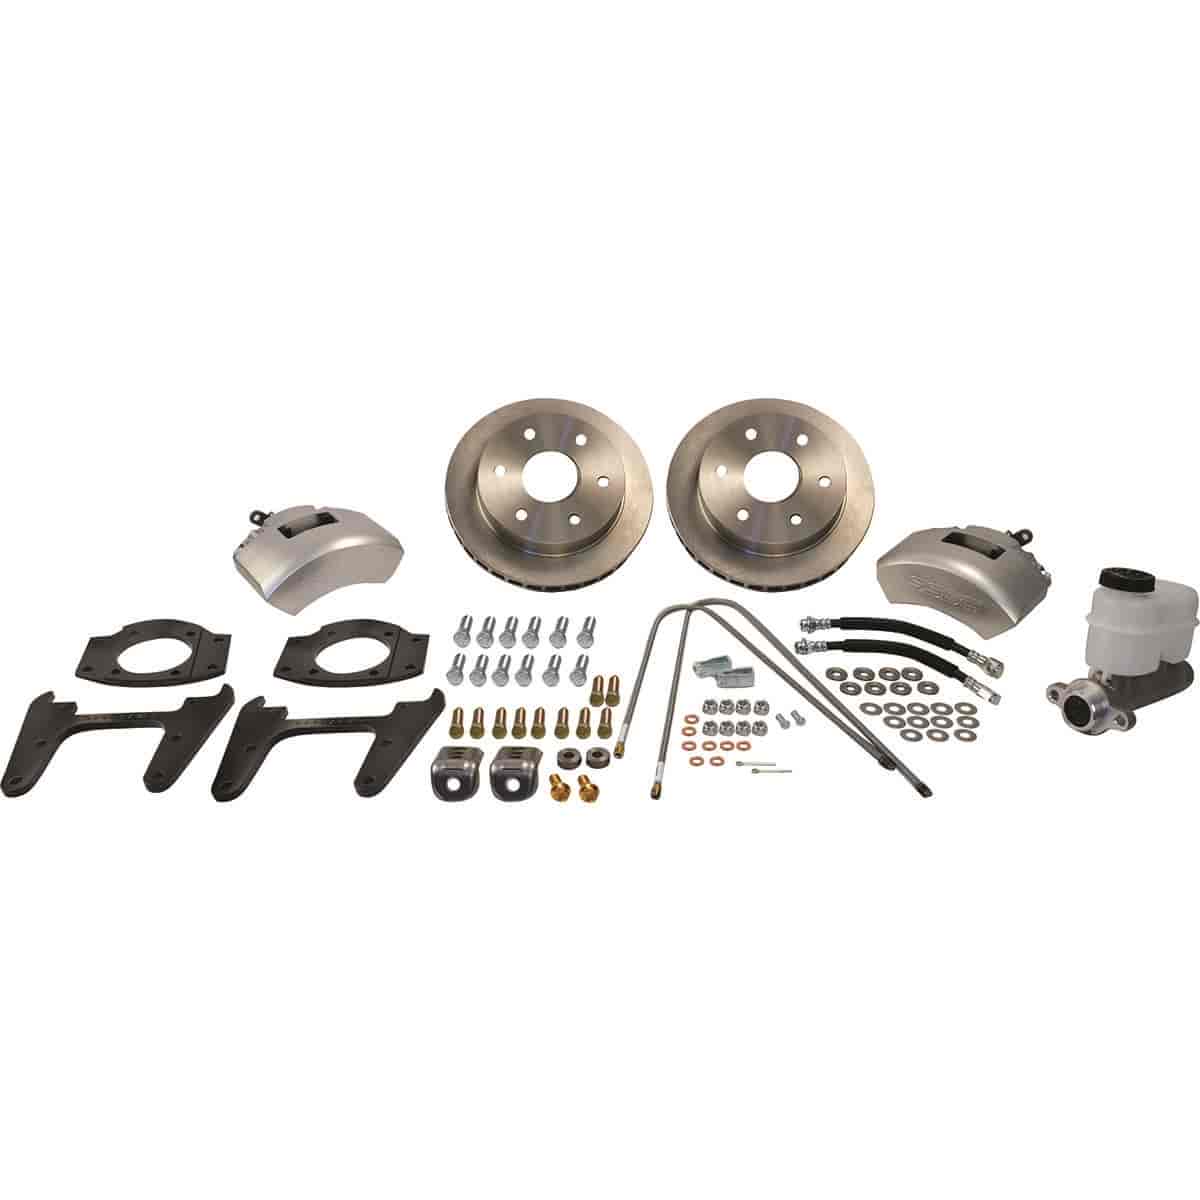 Super TKR1 Single-Piston Rear Drum to Disc Brake Conversion Kit 1988-00 GM (See applications in More Details)